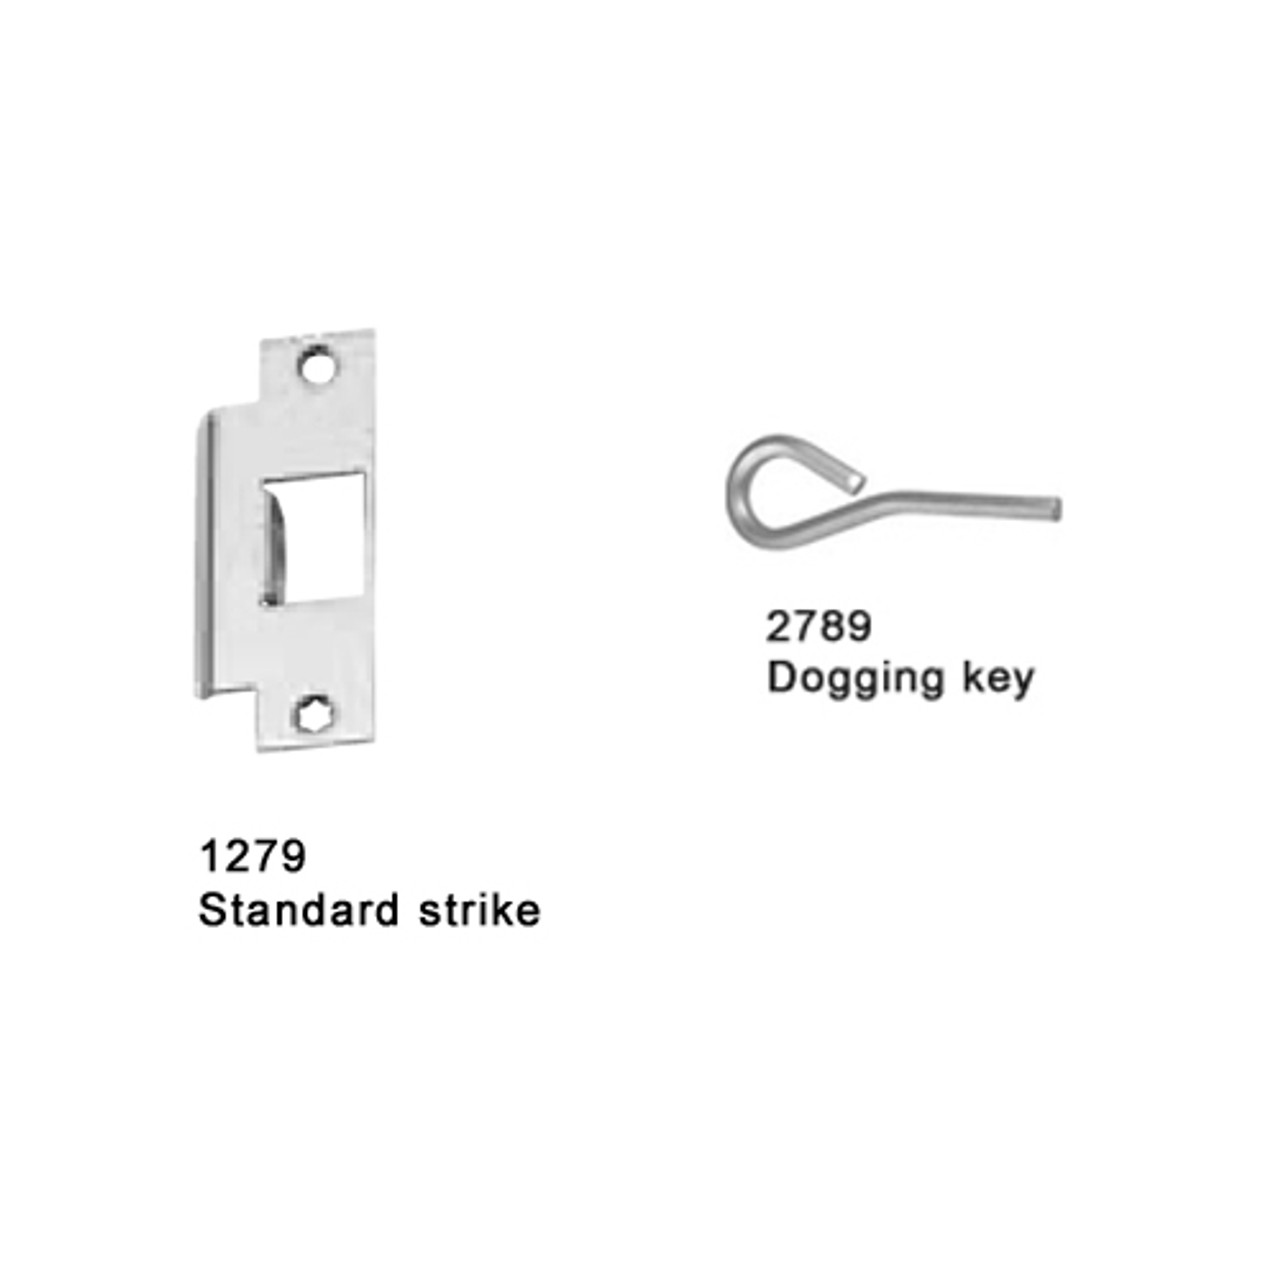 25-M-L-DANE-US32-4-RHR Falcon 25 Series Mortise Lock Devices with 510L Dane Lever Trim in Polished Stainless Steel